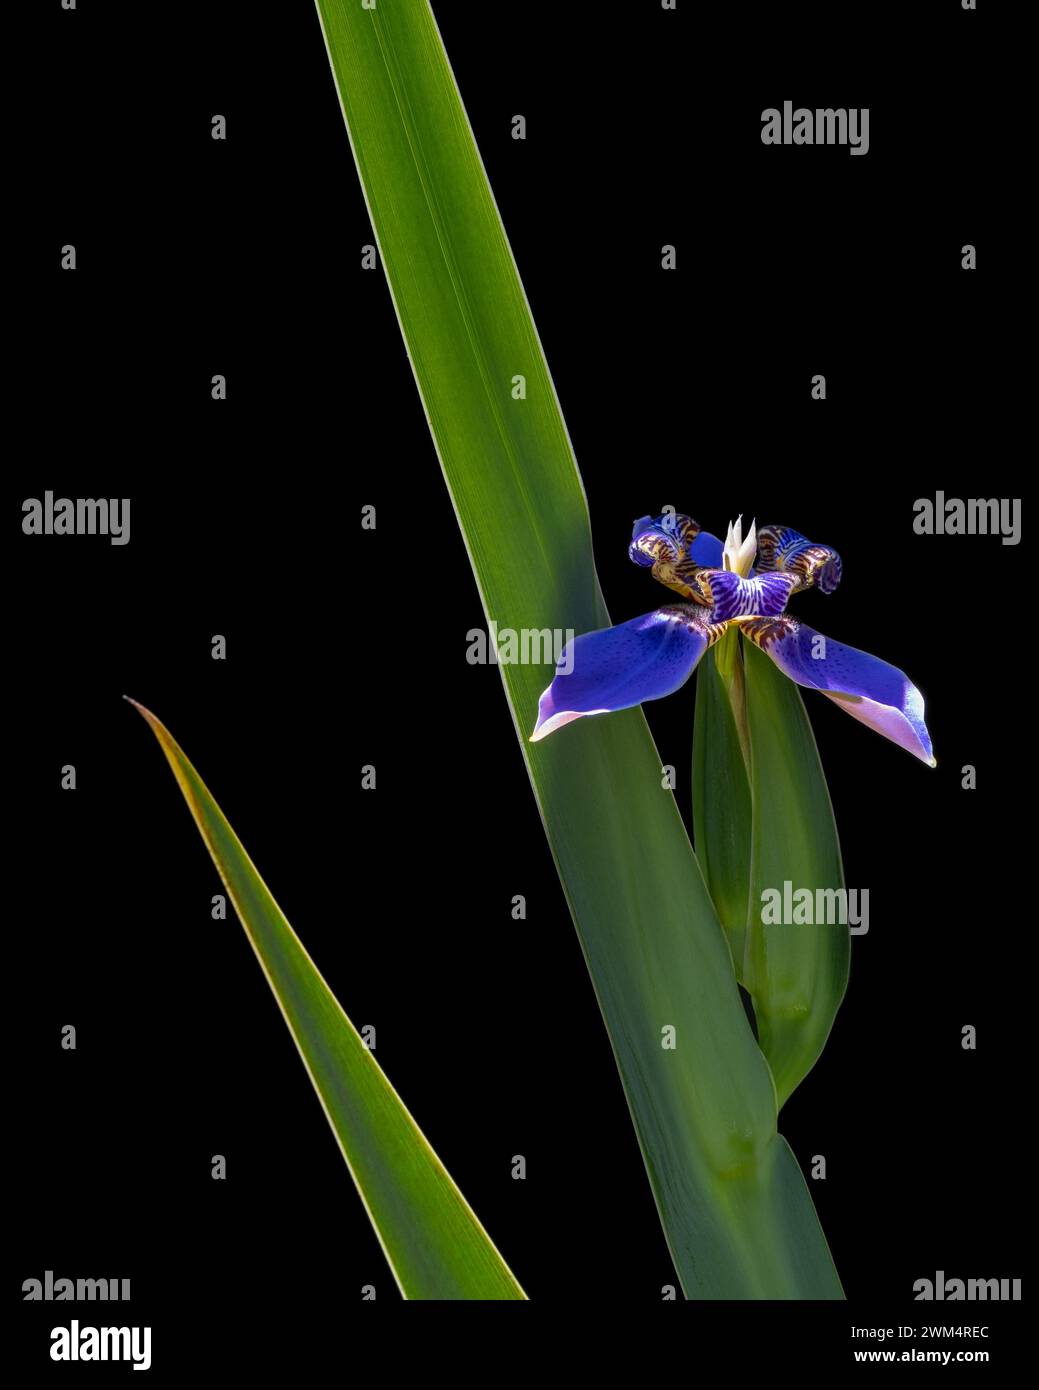 Vertical view of purple blue flower of neomarica caerulea aka walking iris or apostle's iris with leaf, isolated in sunlight on black background Stock Photo